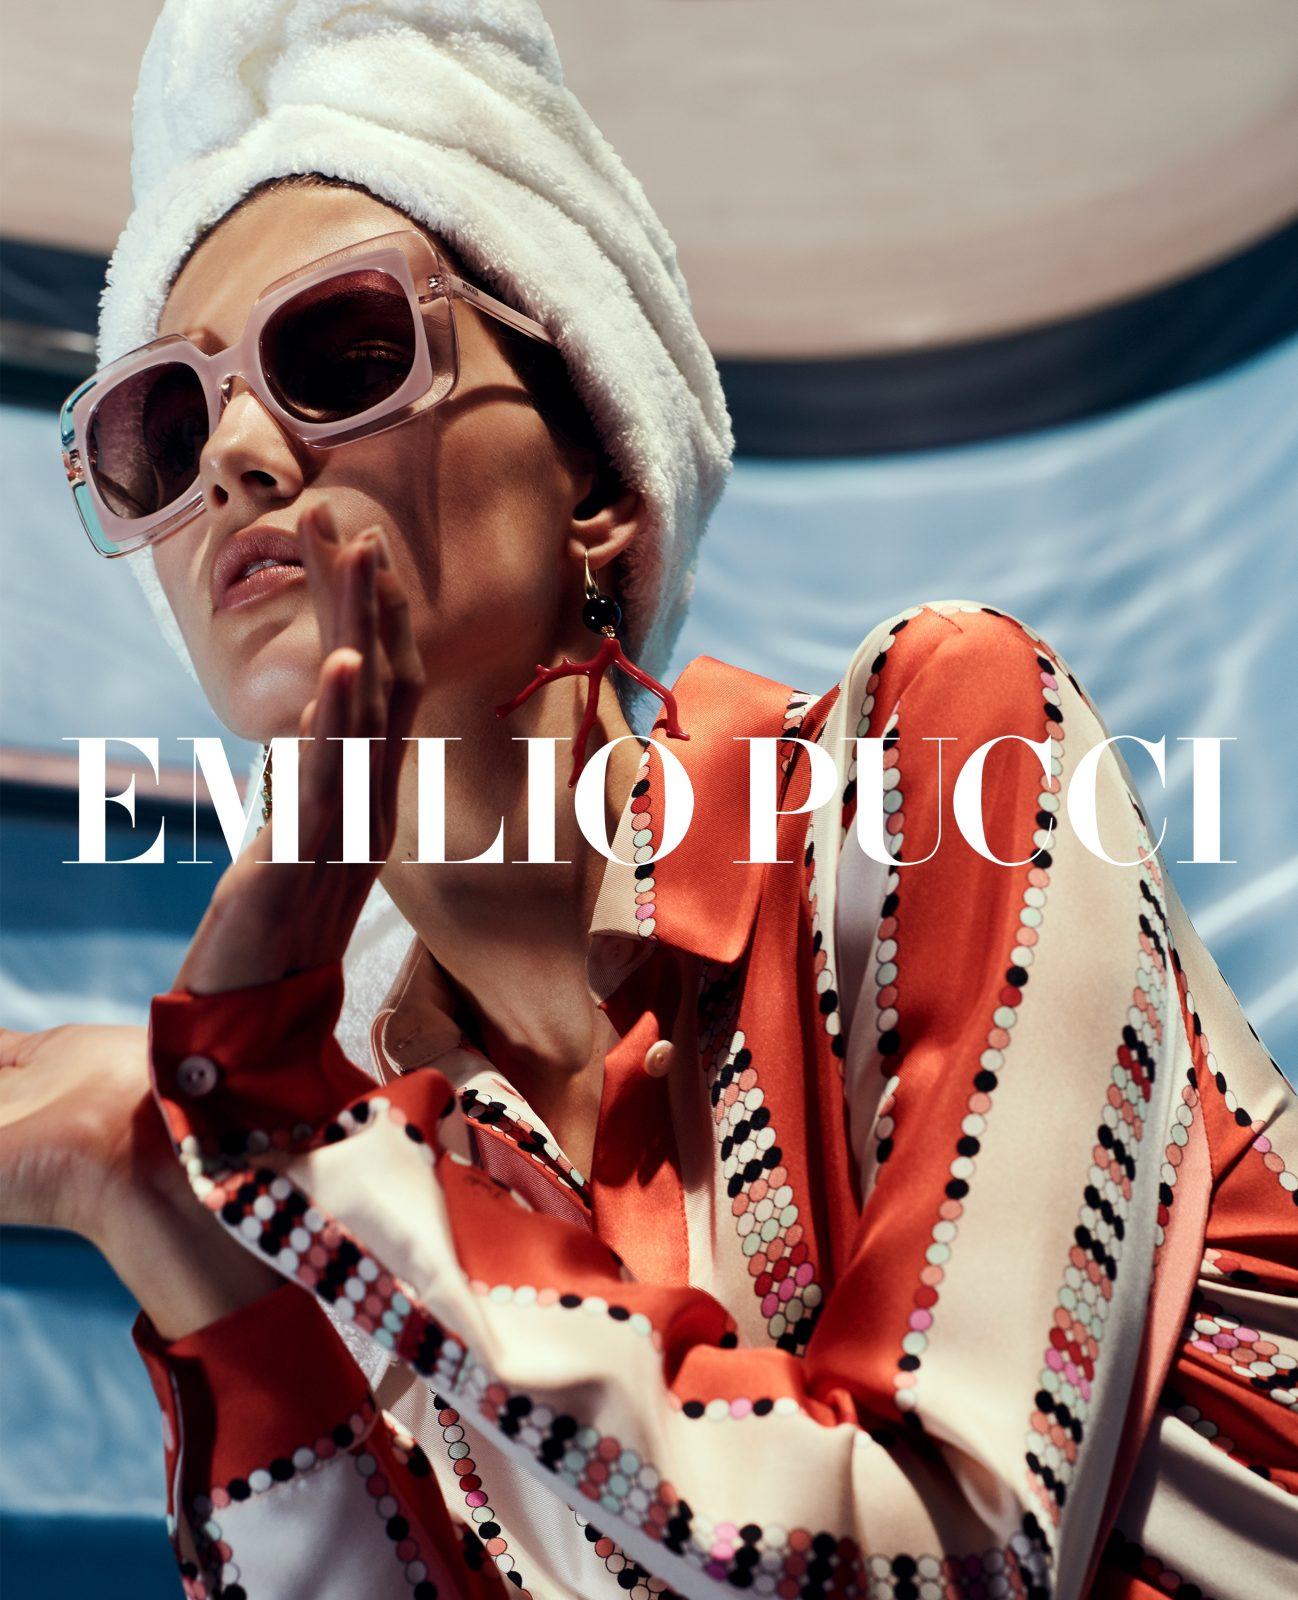 Emilio Pucci Sunglasses
Brand New
* Stunning Classic Pucci Sunglasses
* Deep Purple Front & Interior
* Classic Pucci Print on Sides
* No Two Sides are Alike!
* Silver Pucci Logo on Both Sides
* Handmade ZYL in Italy
* 100% UV Protection
* Comes with